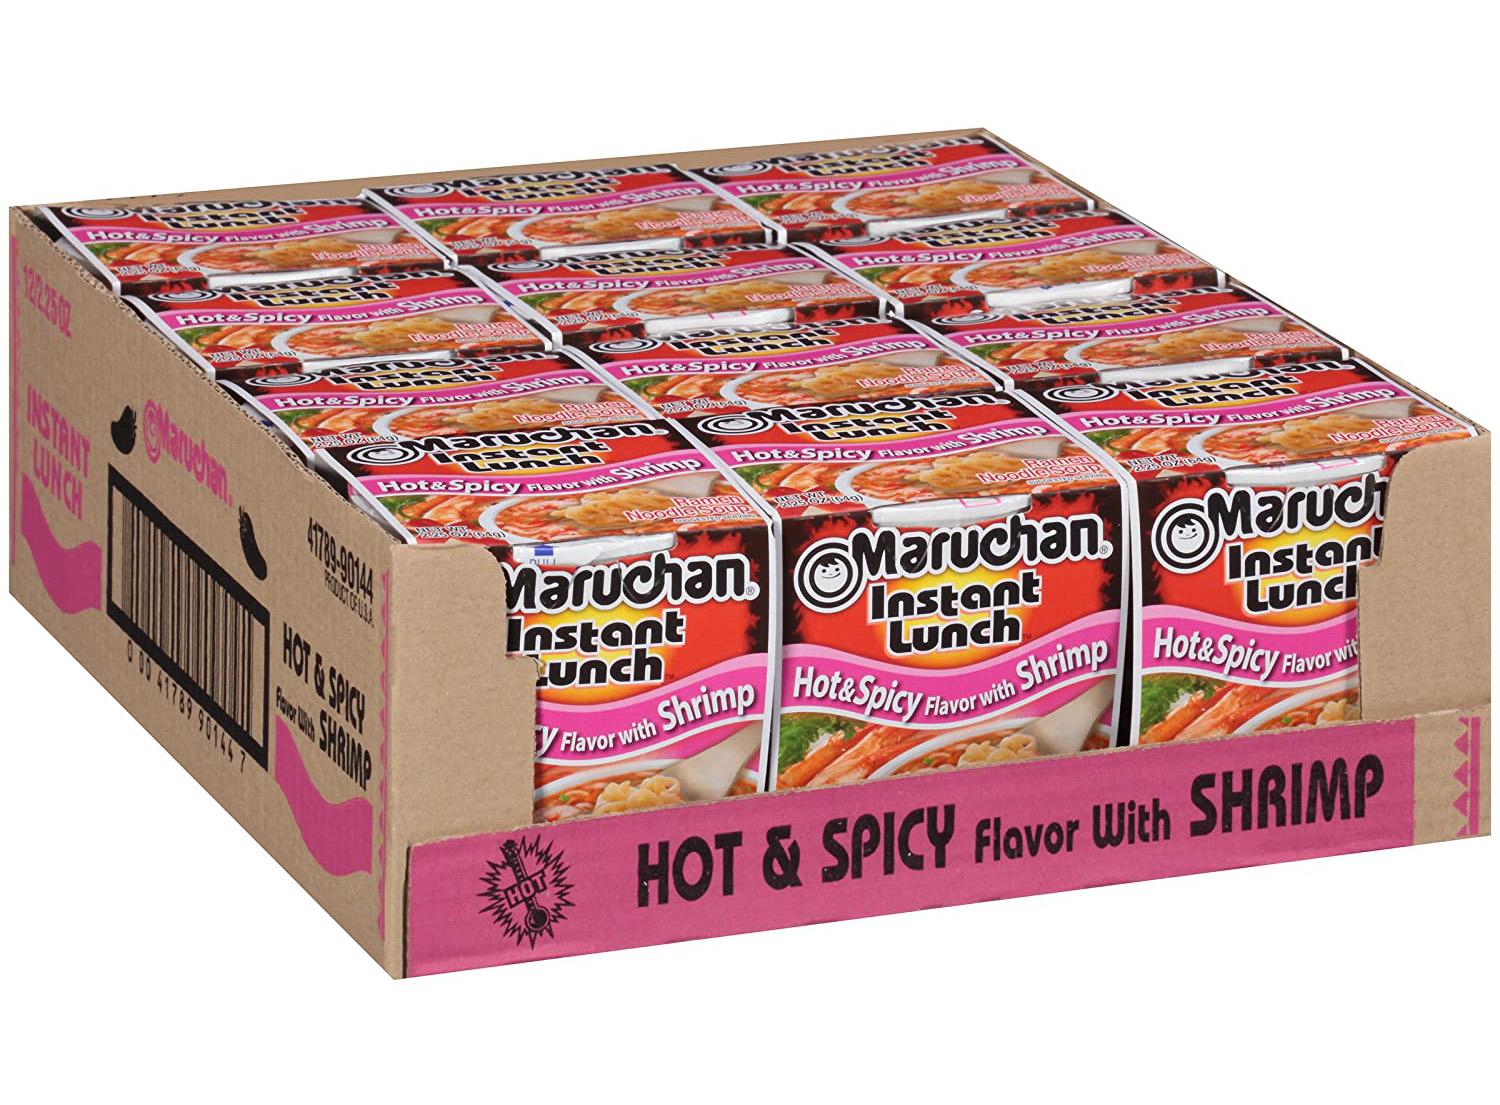 12 Maruchan Instant Lunch Hot and Spicy Shrimp Cup Noodles for $5.04 Shipped